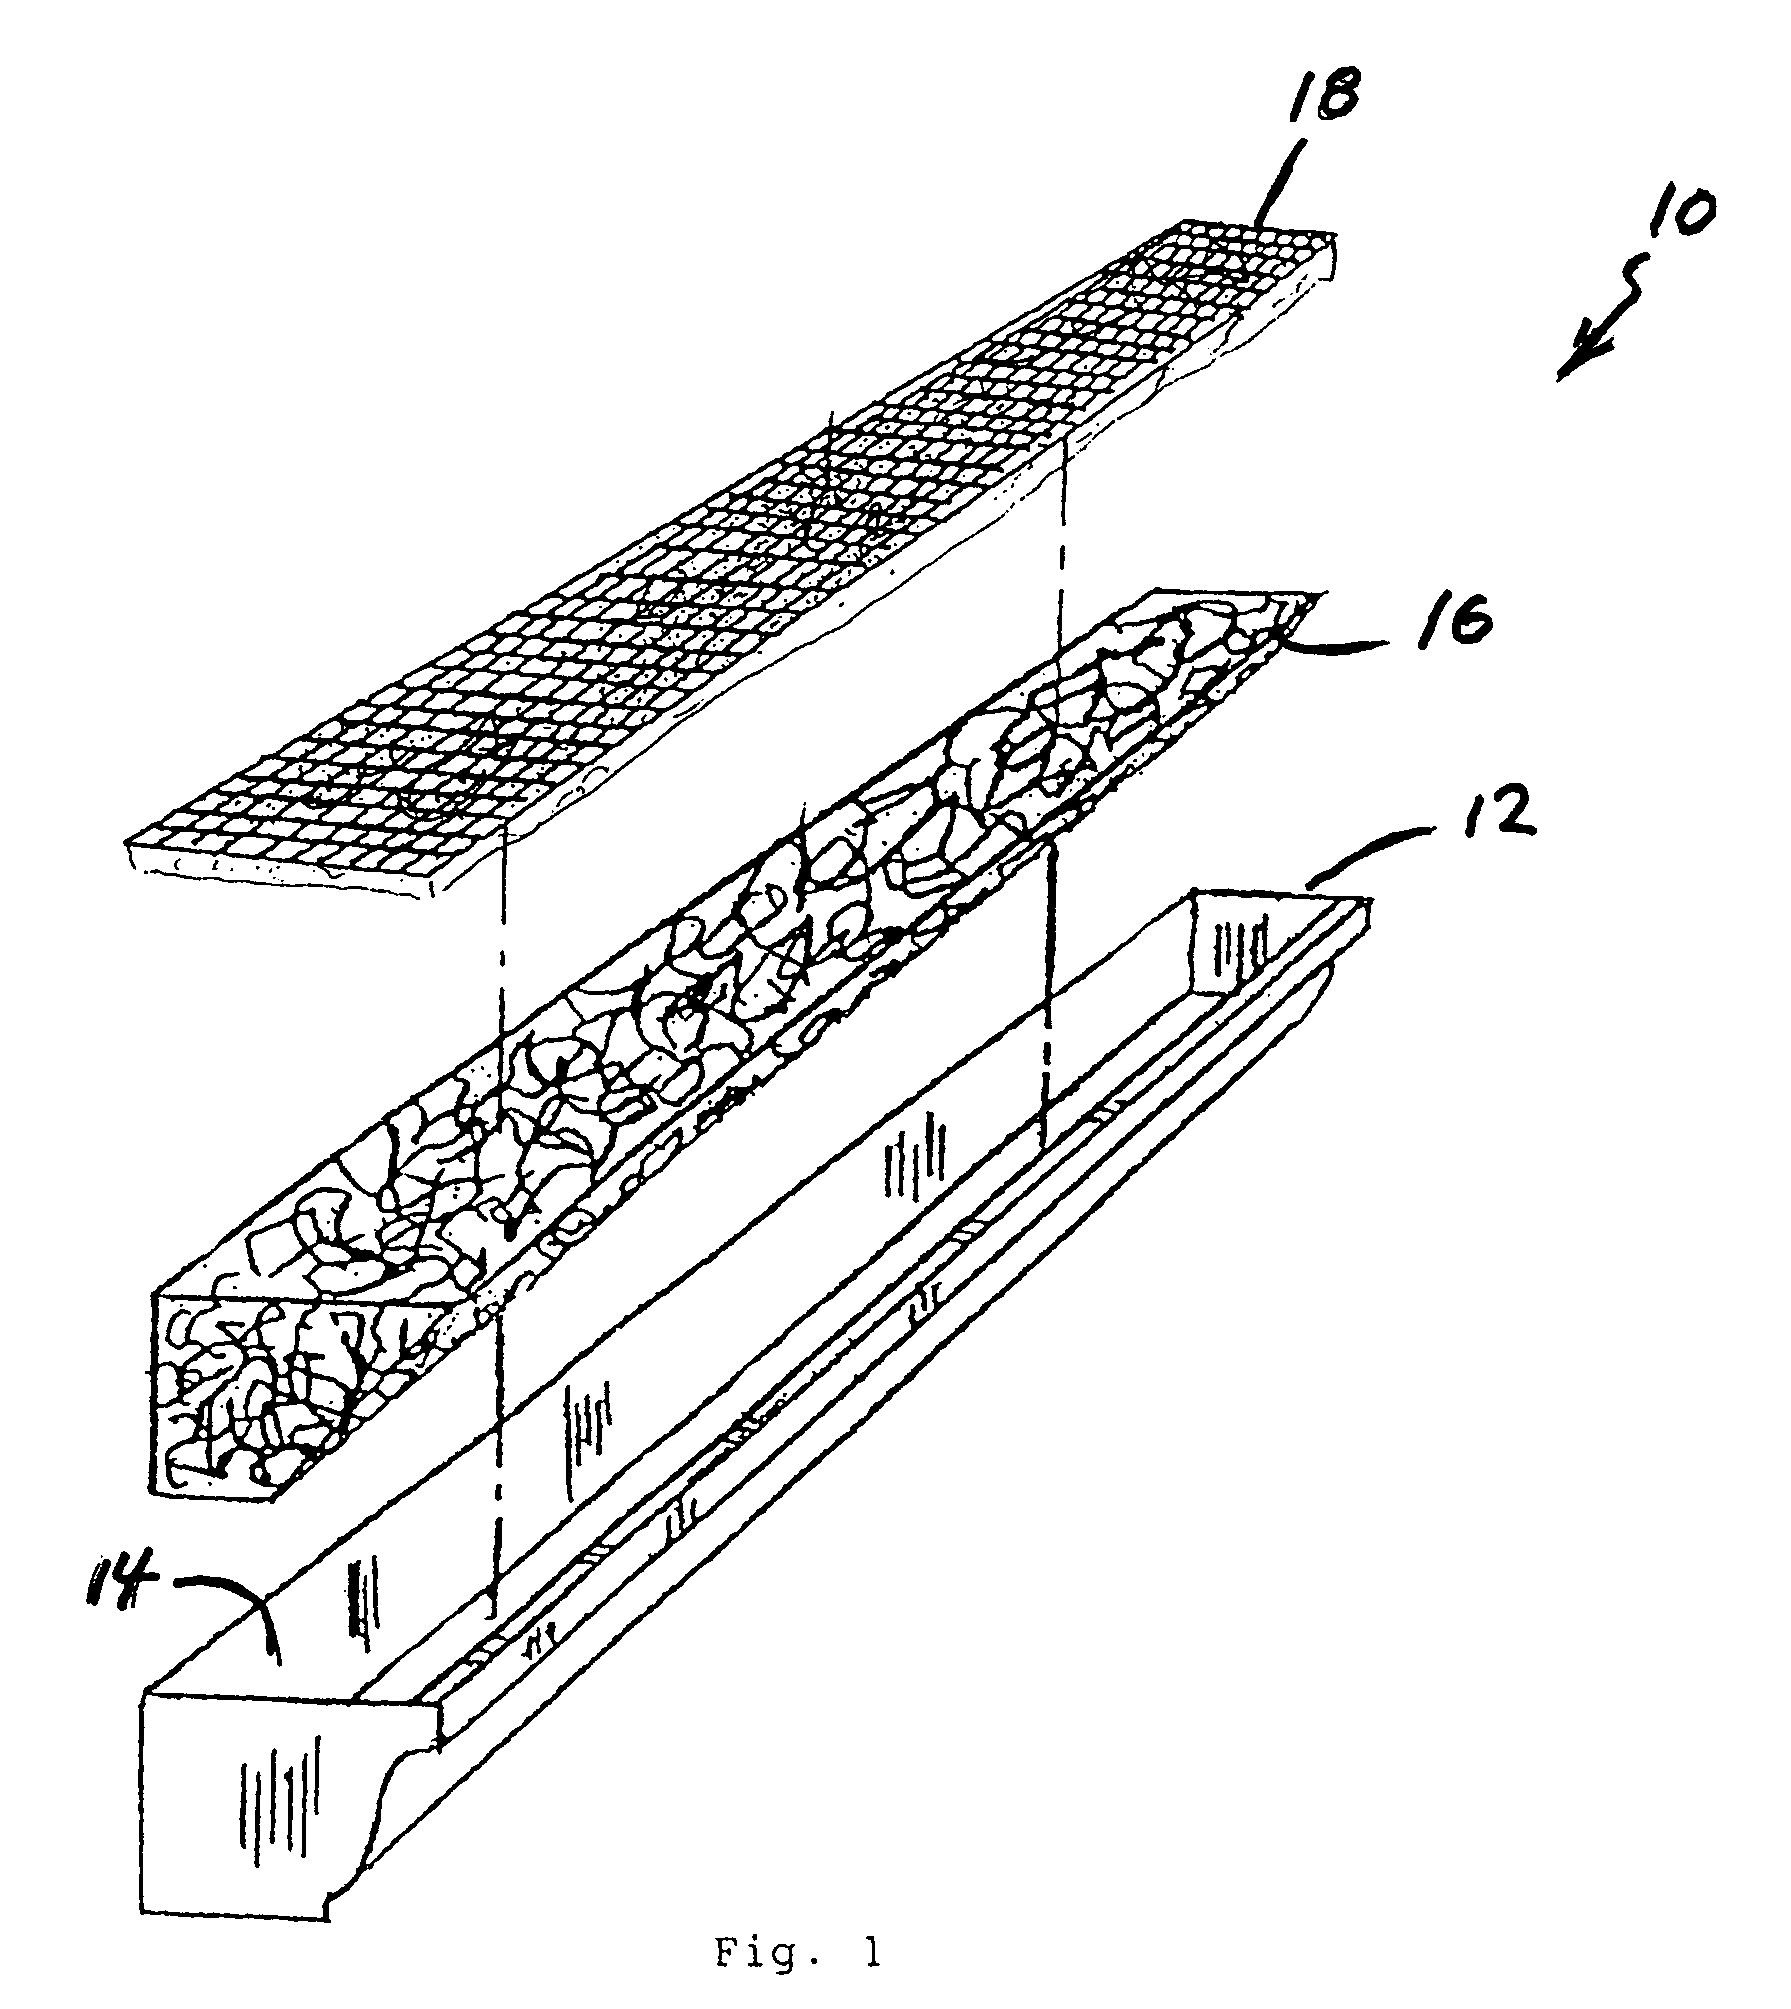 Gutter insert device and method